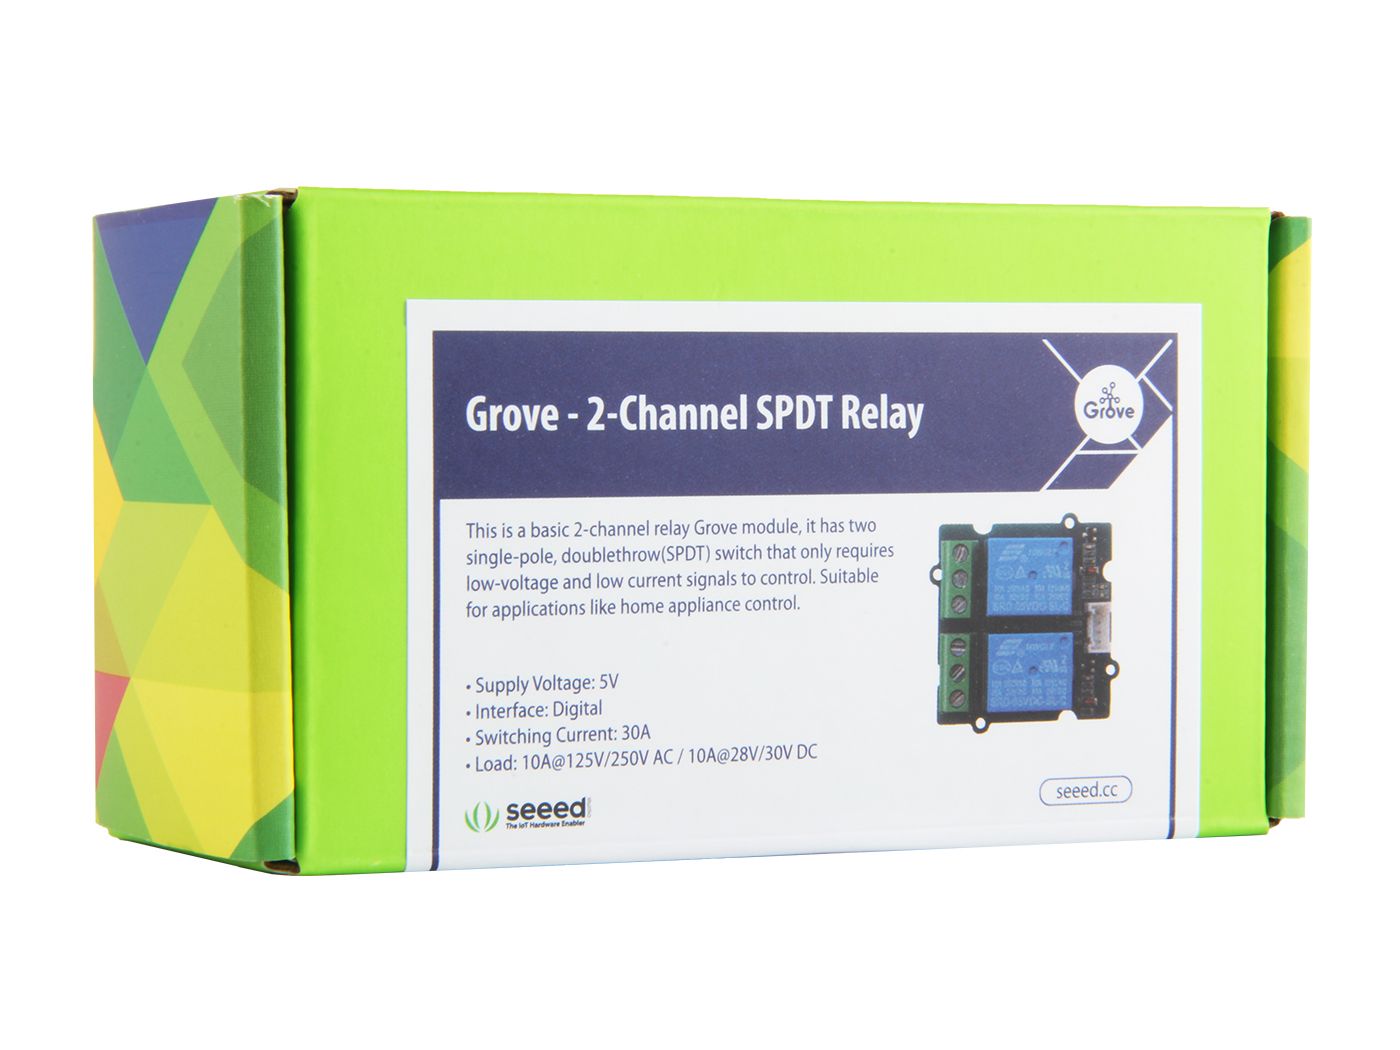 Seeed Grove 2 Channel SPDT Relay